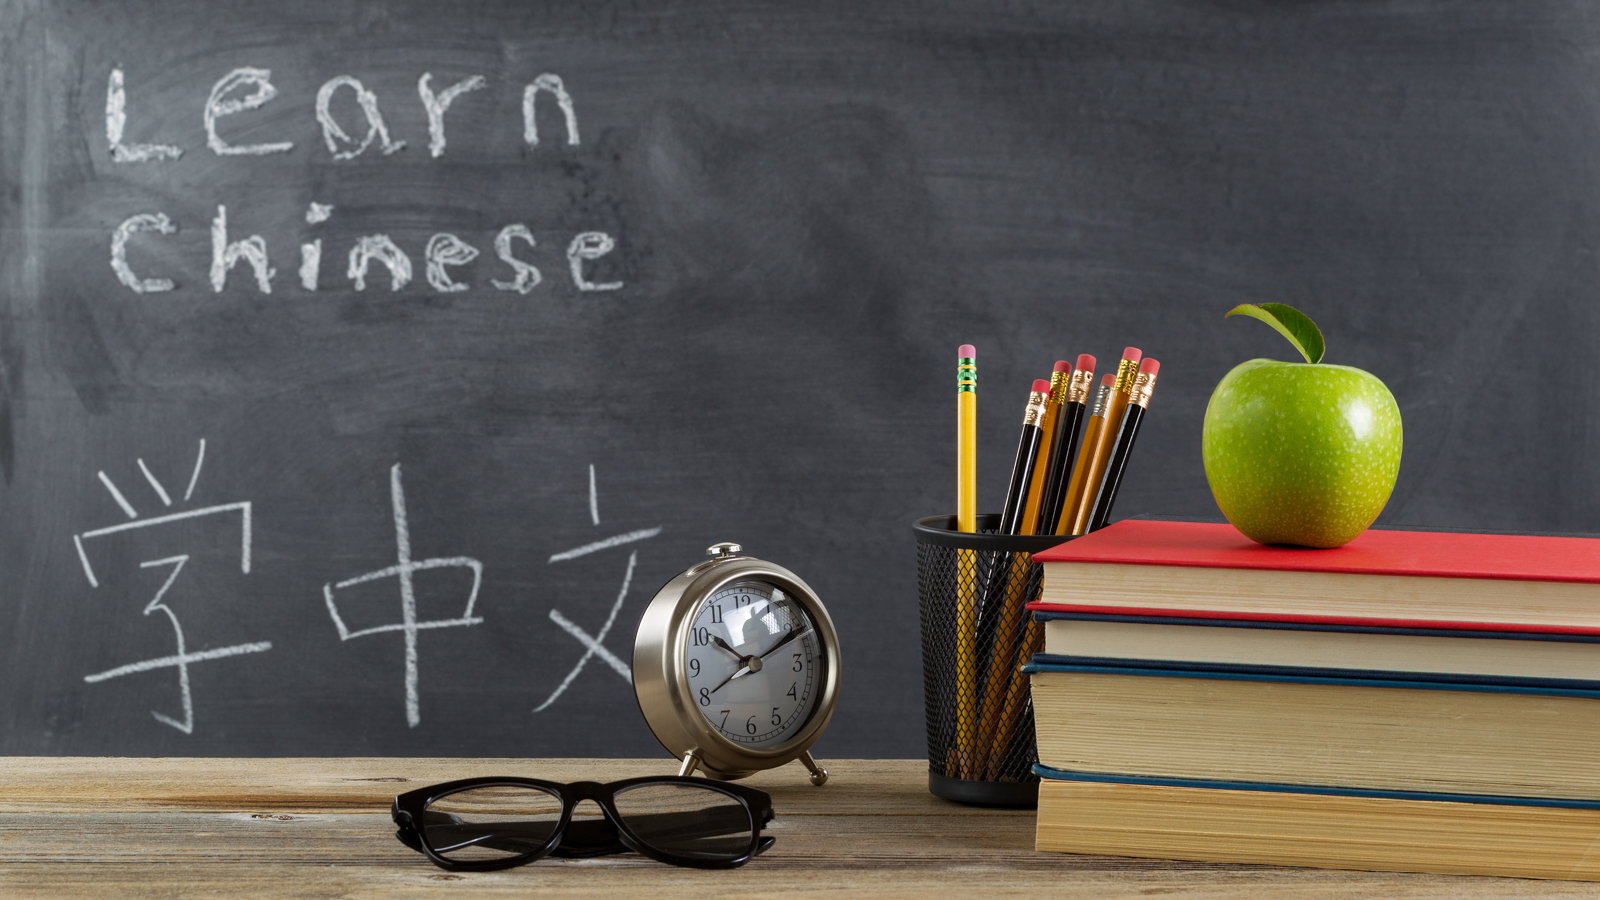 chalkboard that says learn chinese